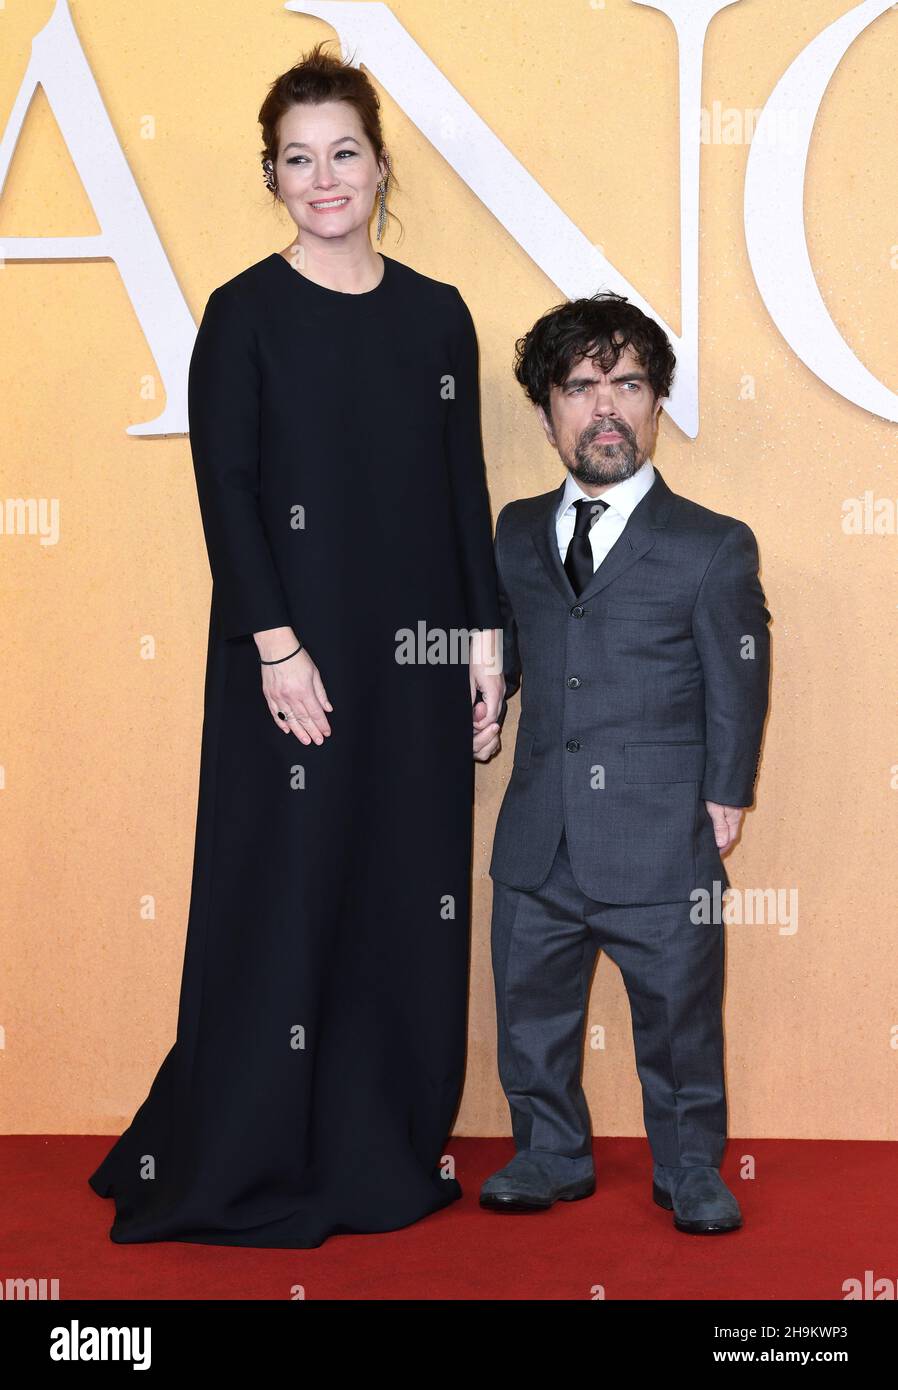 December 7th, 2021. London, UK. Erica Schmidt and Peter Dinklage attending Cyrano UK Premiere, Odeon Luxe Cinema, Leicester Square, London. Credit: Doug Peters/EMPICS/Alamy Live News Stock Photo